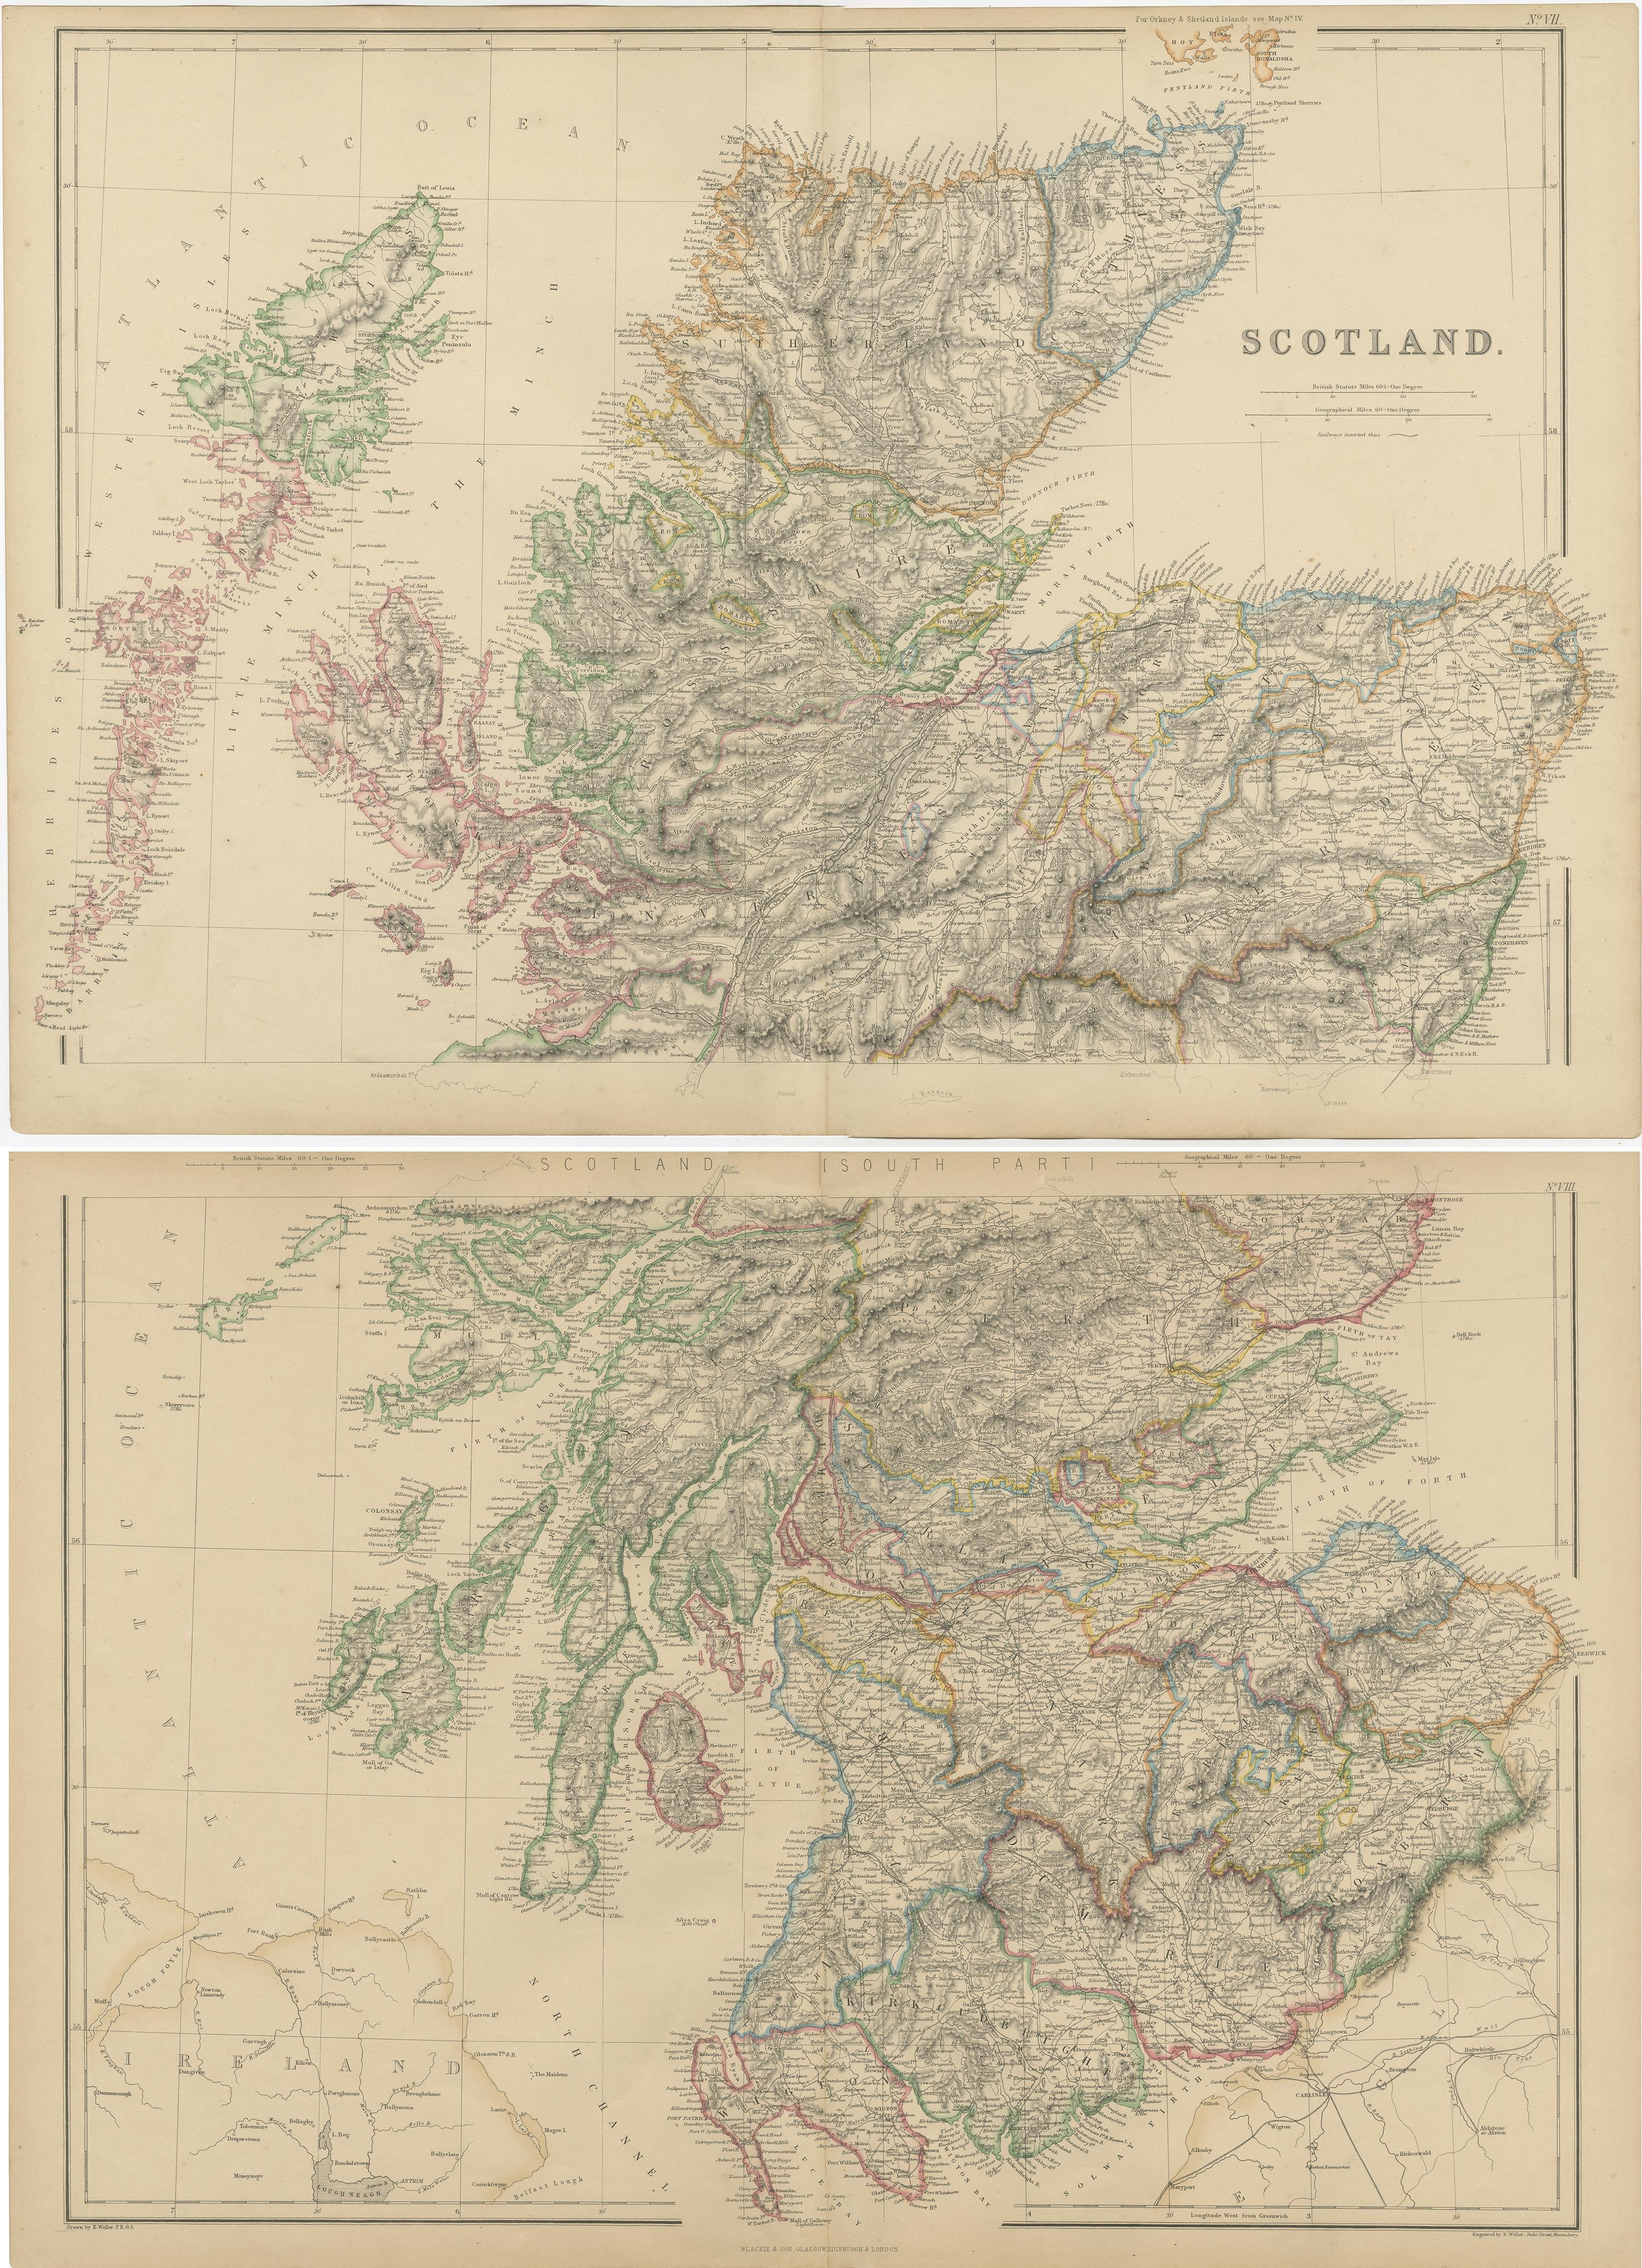 Antique map titled 'Scotland'. Original antique map of Scotland. This map originates from ‘The Imperial Atlas of Modern Geography’. Published by W. G. Blackie, 1859.